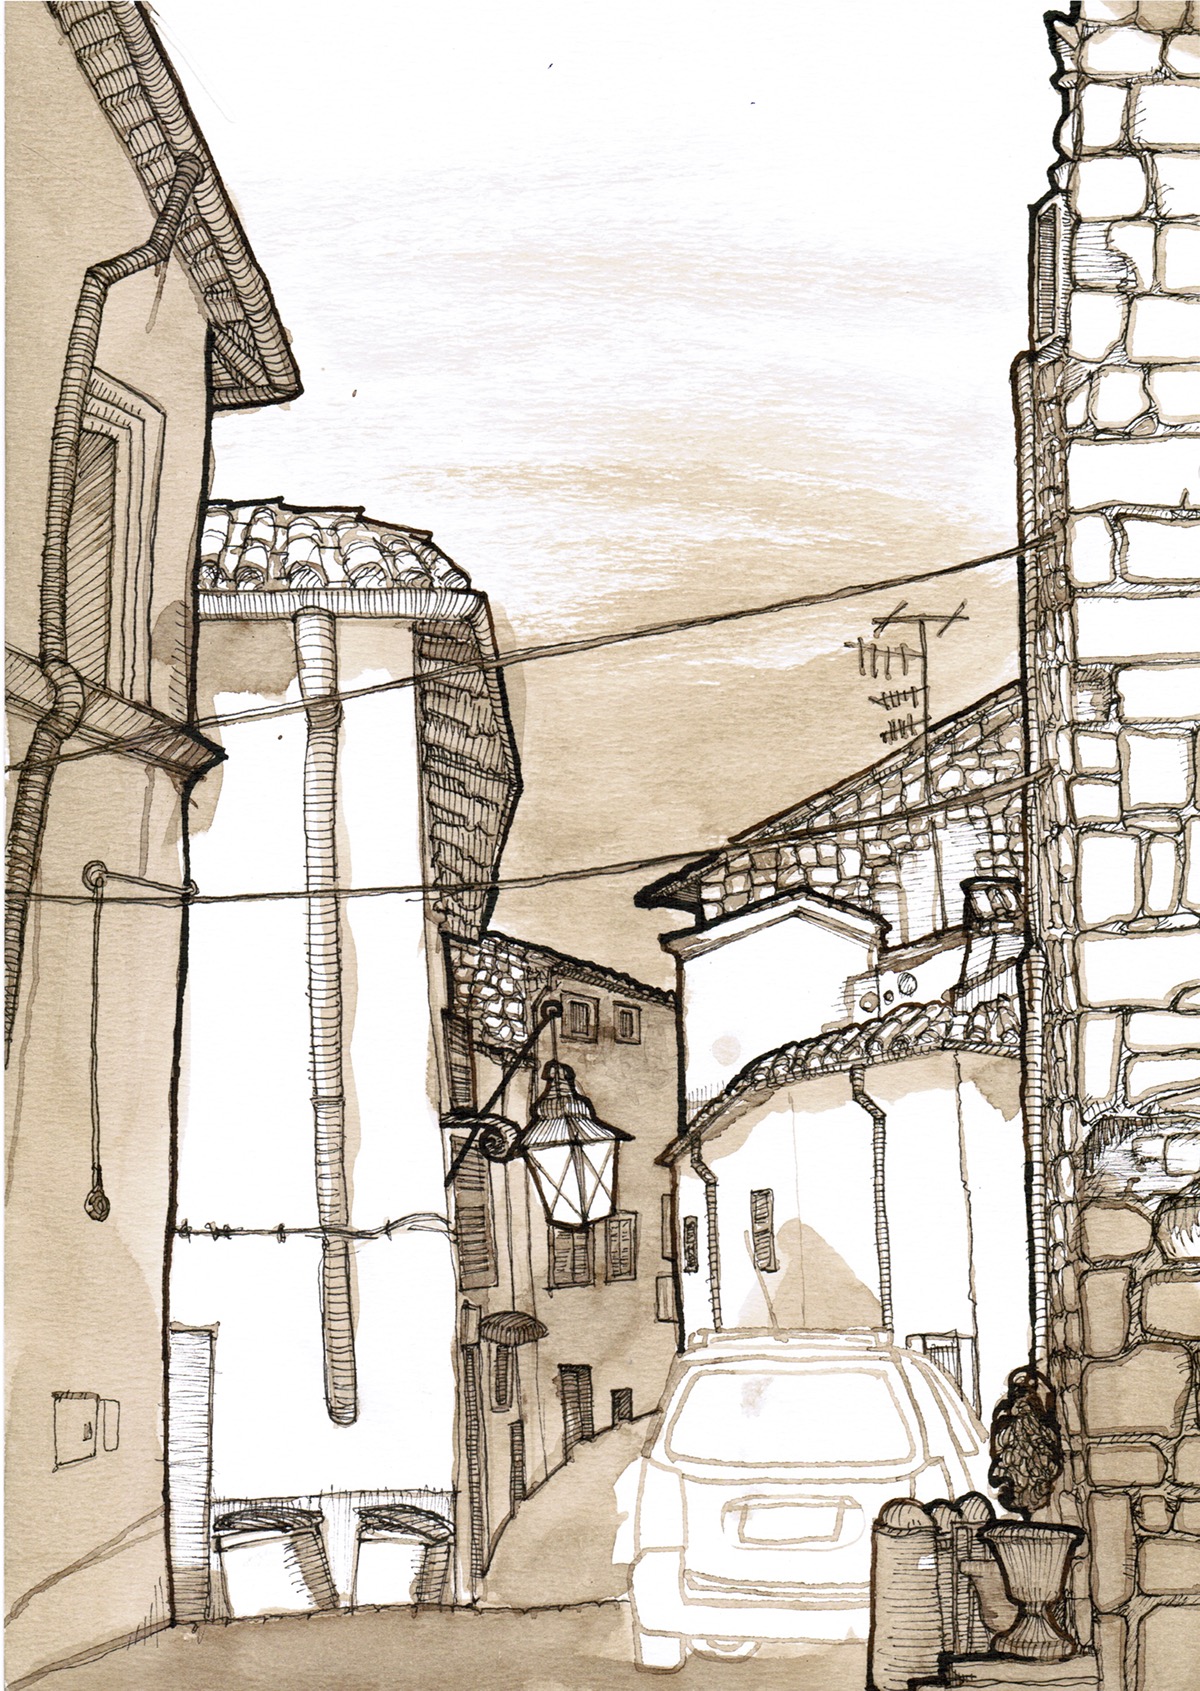 viterbo journalistic illustration on location location Italy ink pen dipping pen achitectural risd final chaos streetlife Street